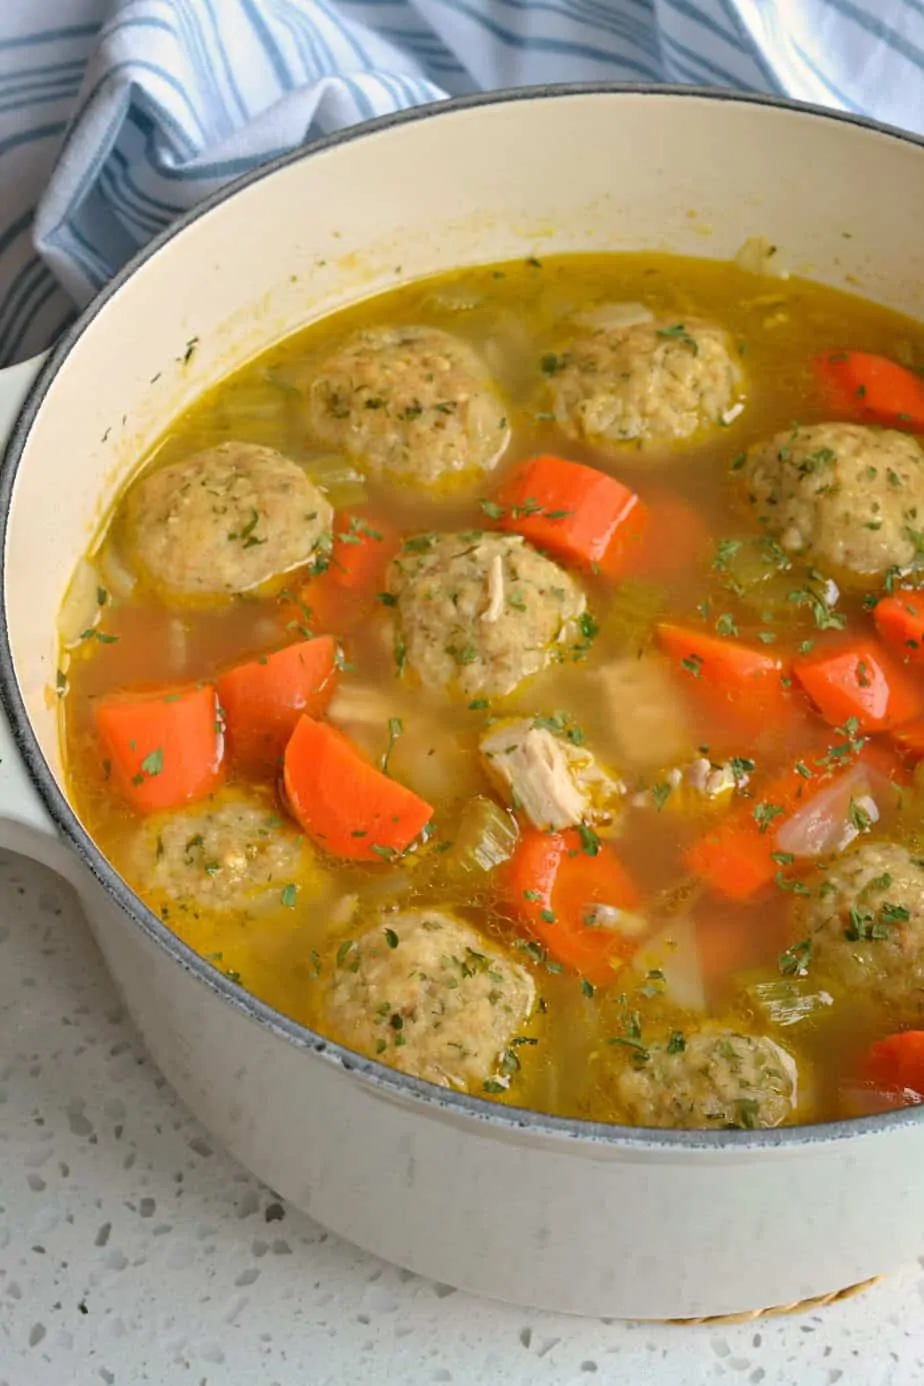 Matzo Ball Soup brings chicken, carrots, celery and onions together in a seasoned chicken broth with fluffy matzo balls.